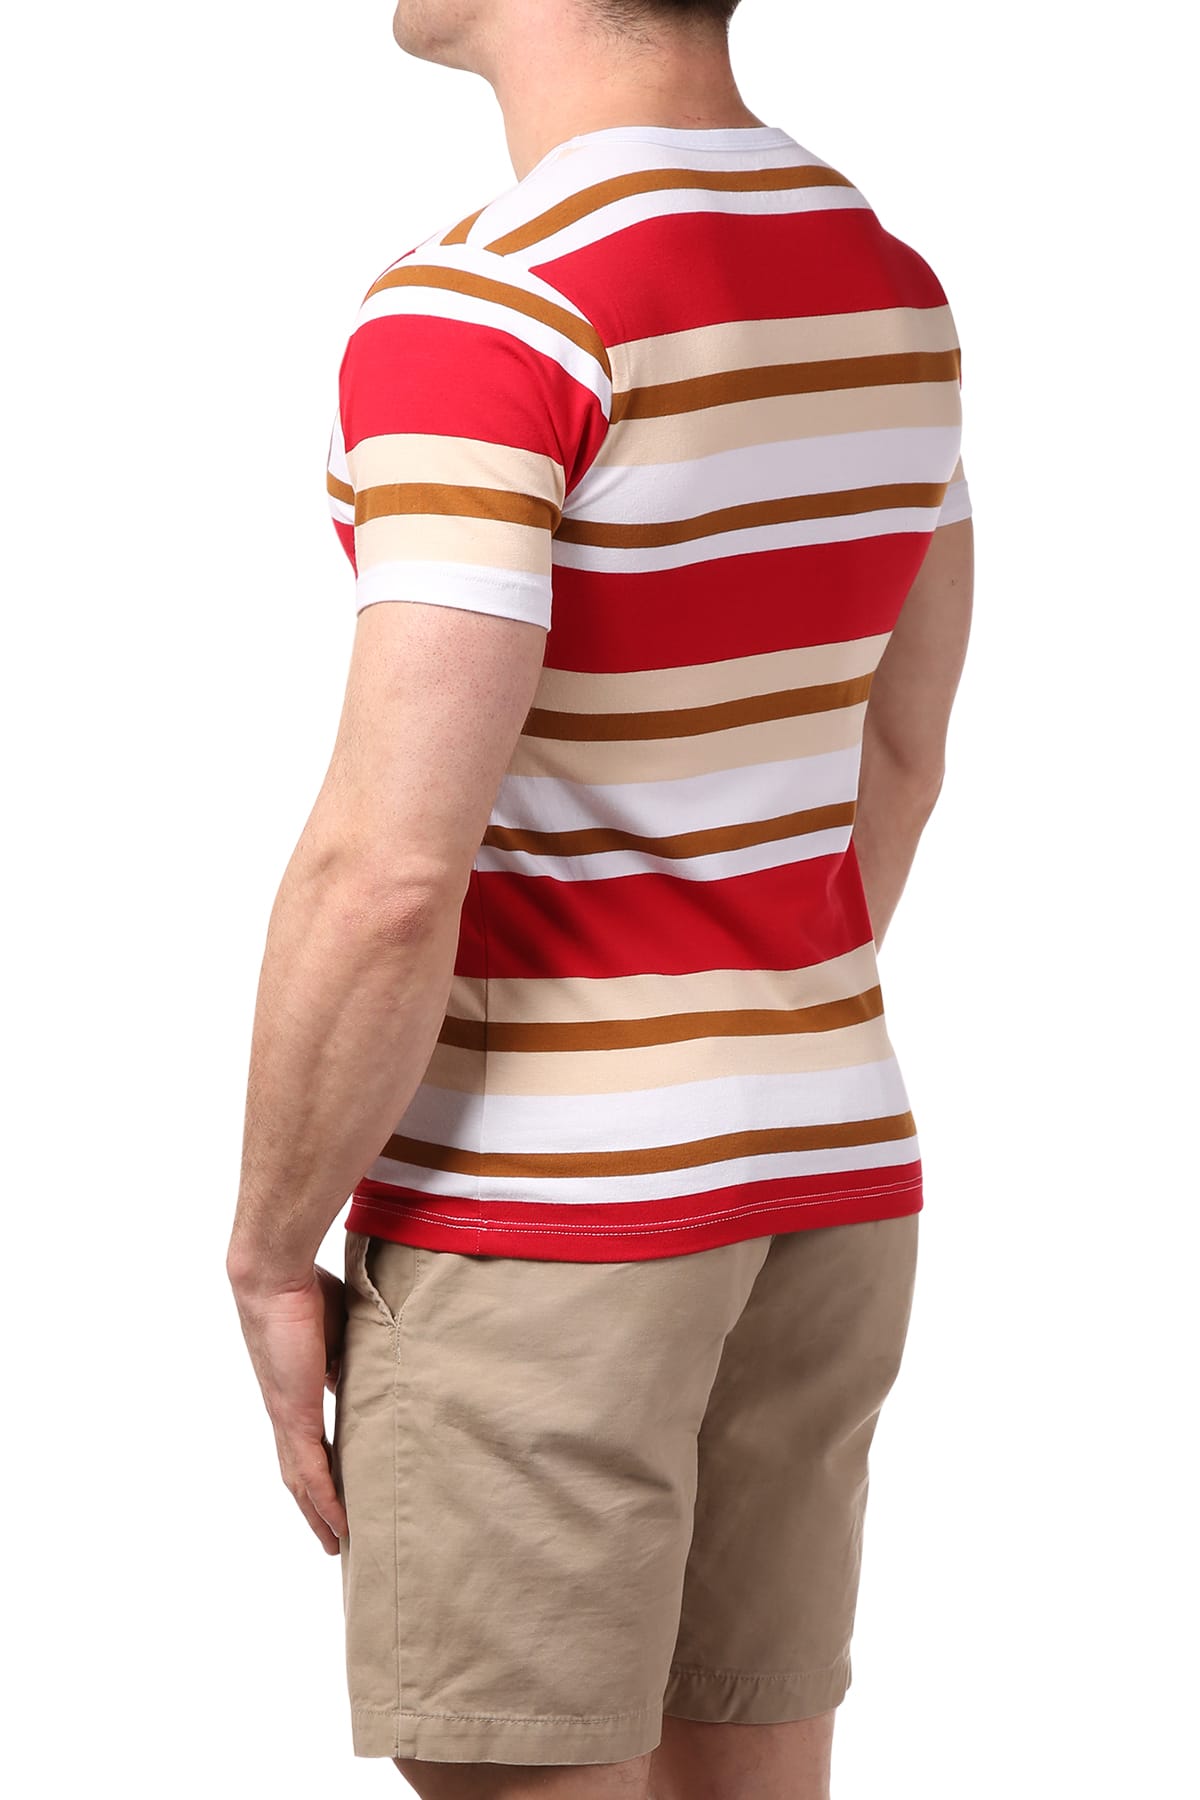 Manview Brown Striped V-Neck Tee